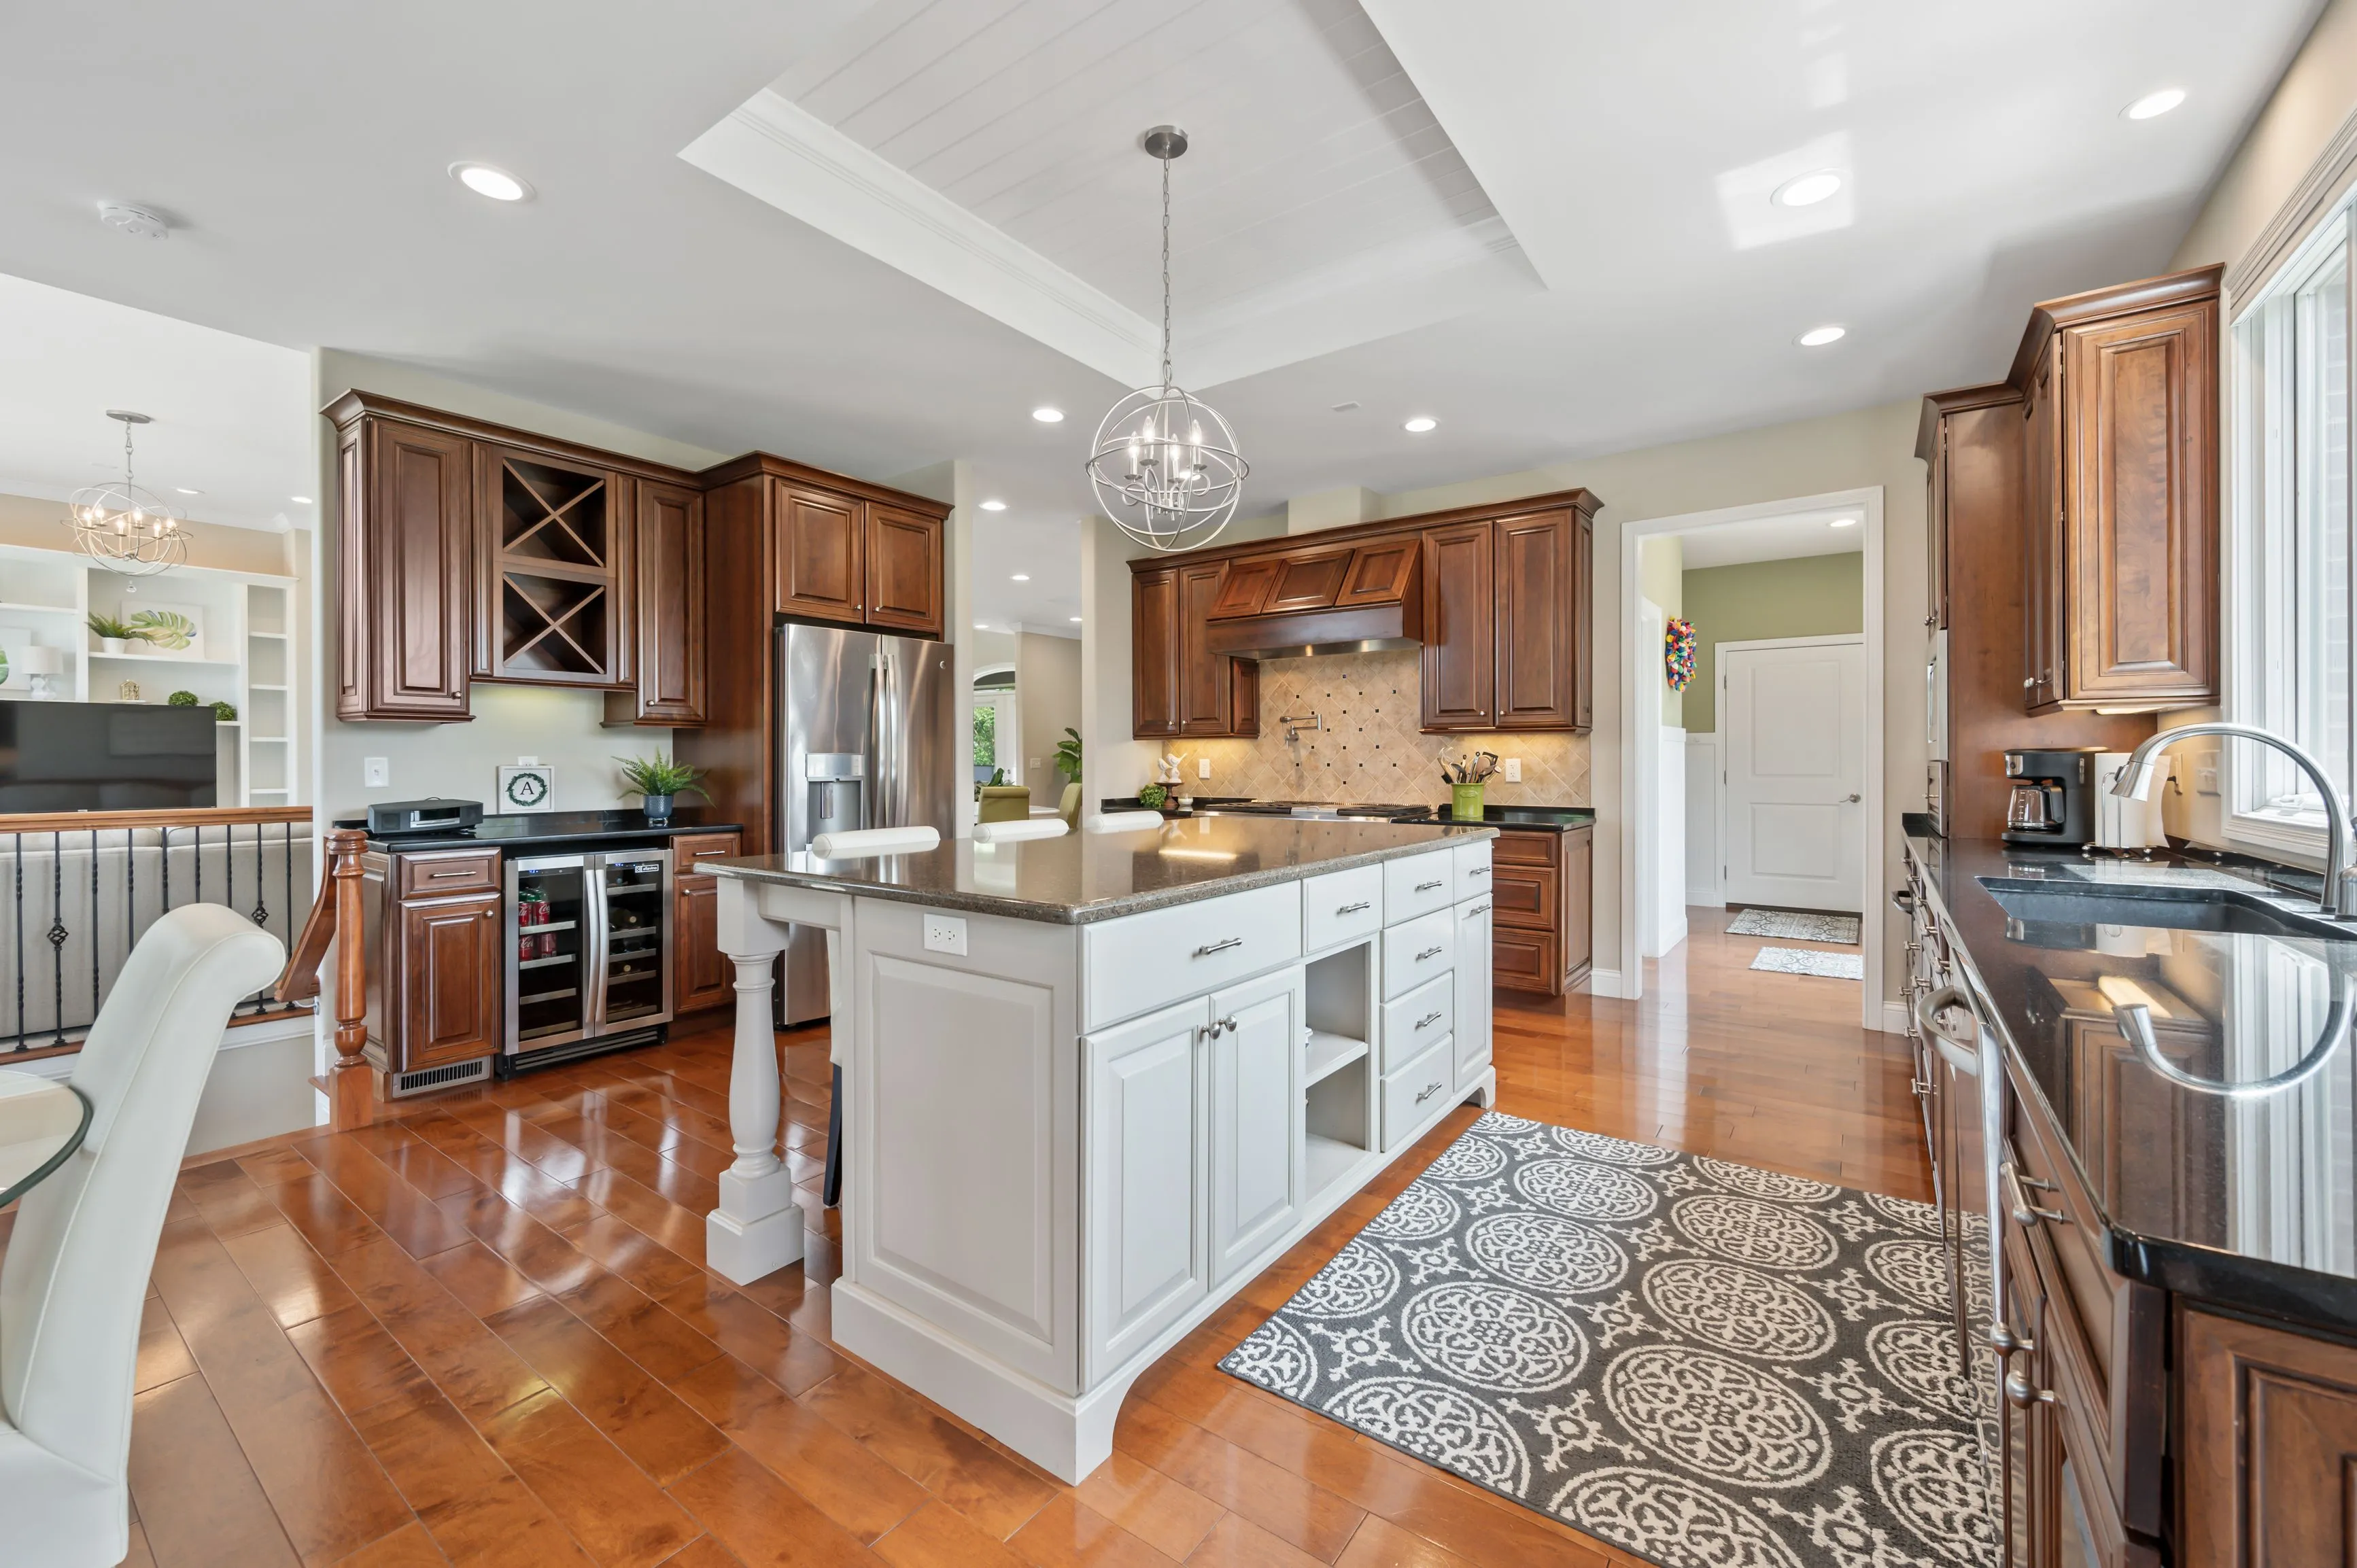 Spacious kitchen interior with wooden cabinets, central island, and hardwood floors.